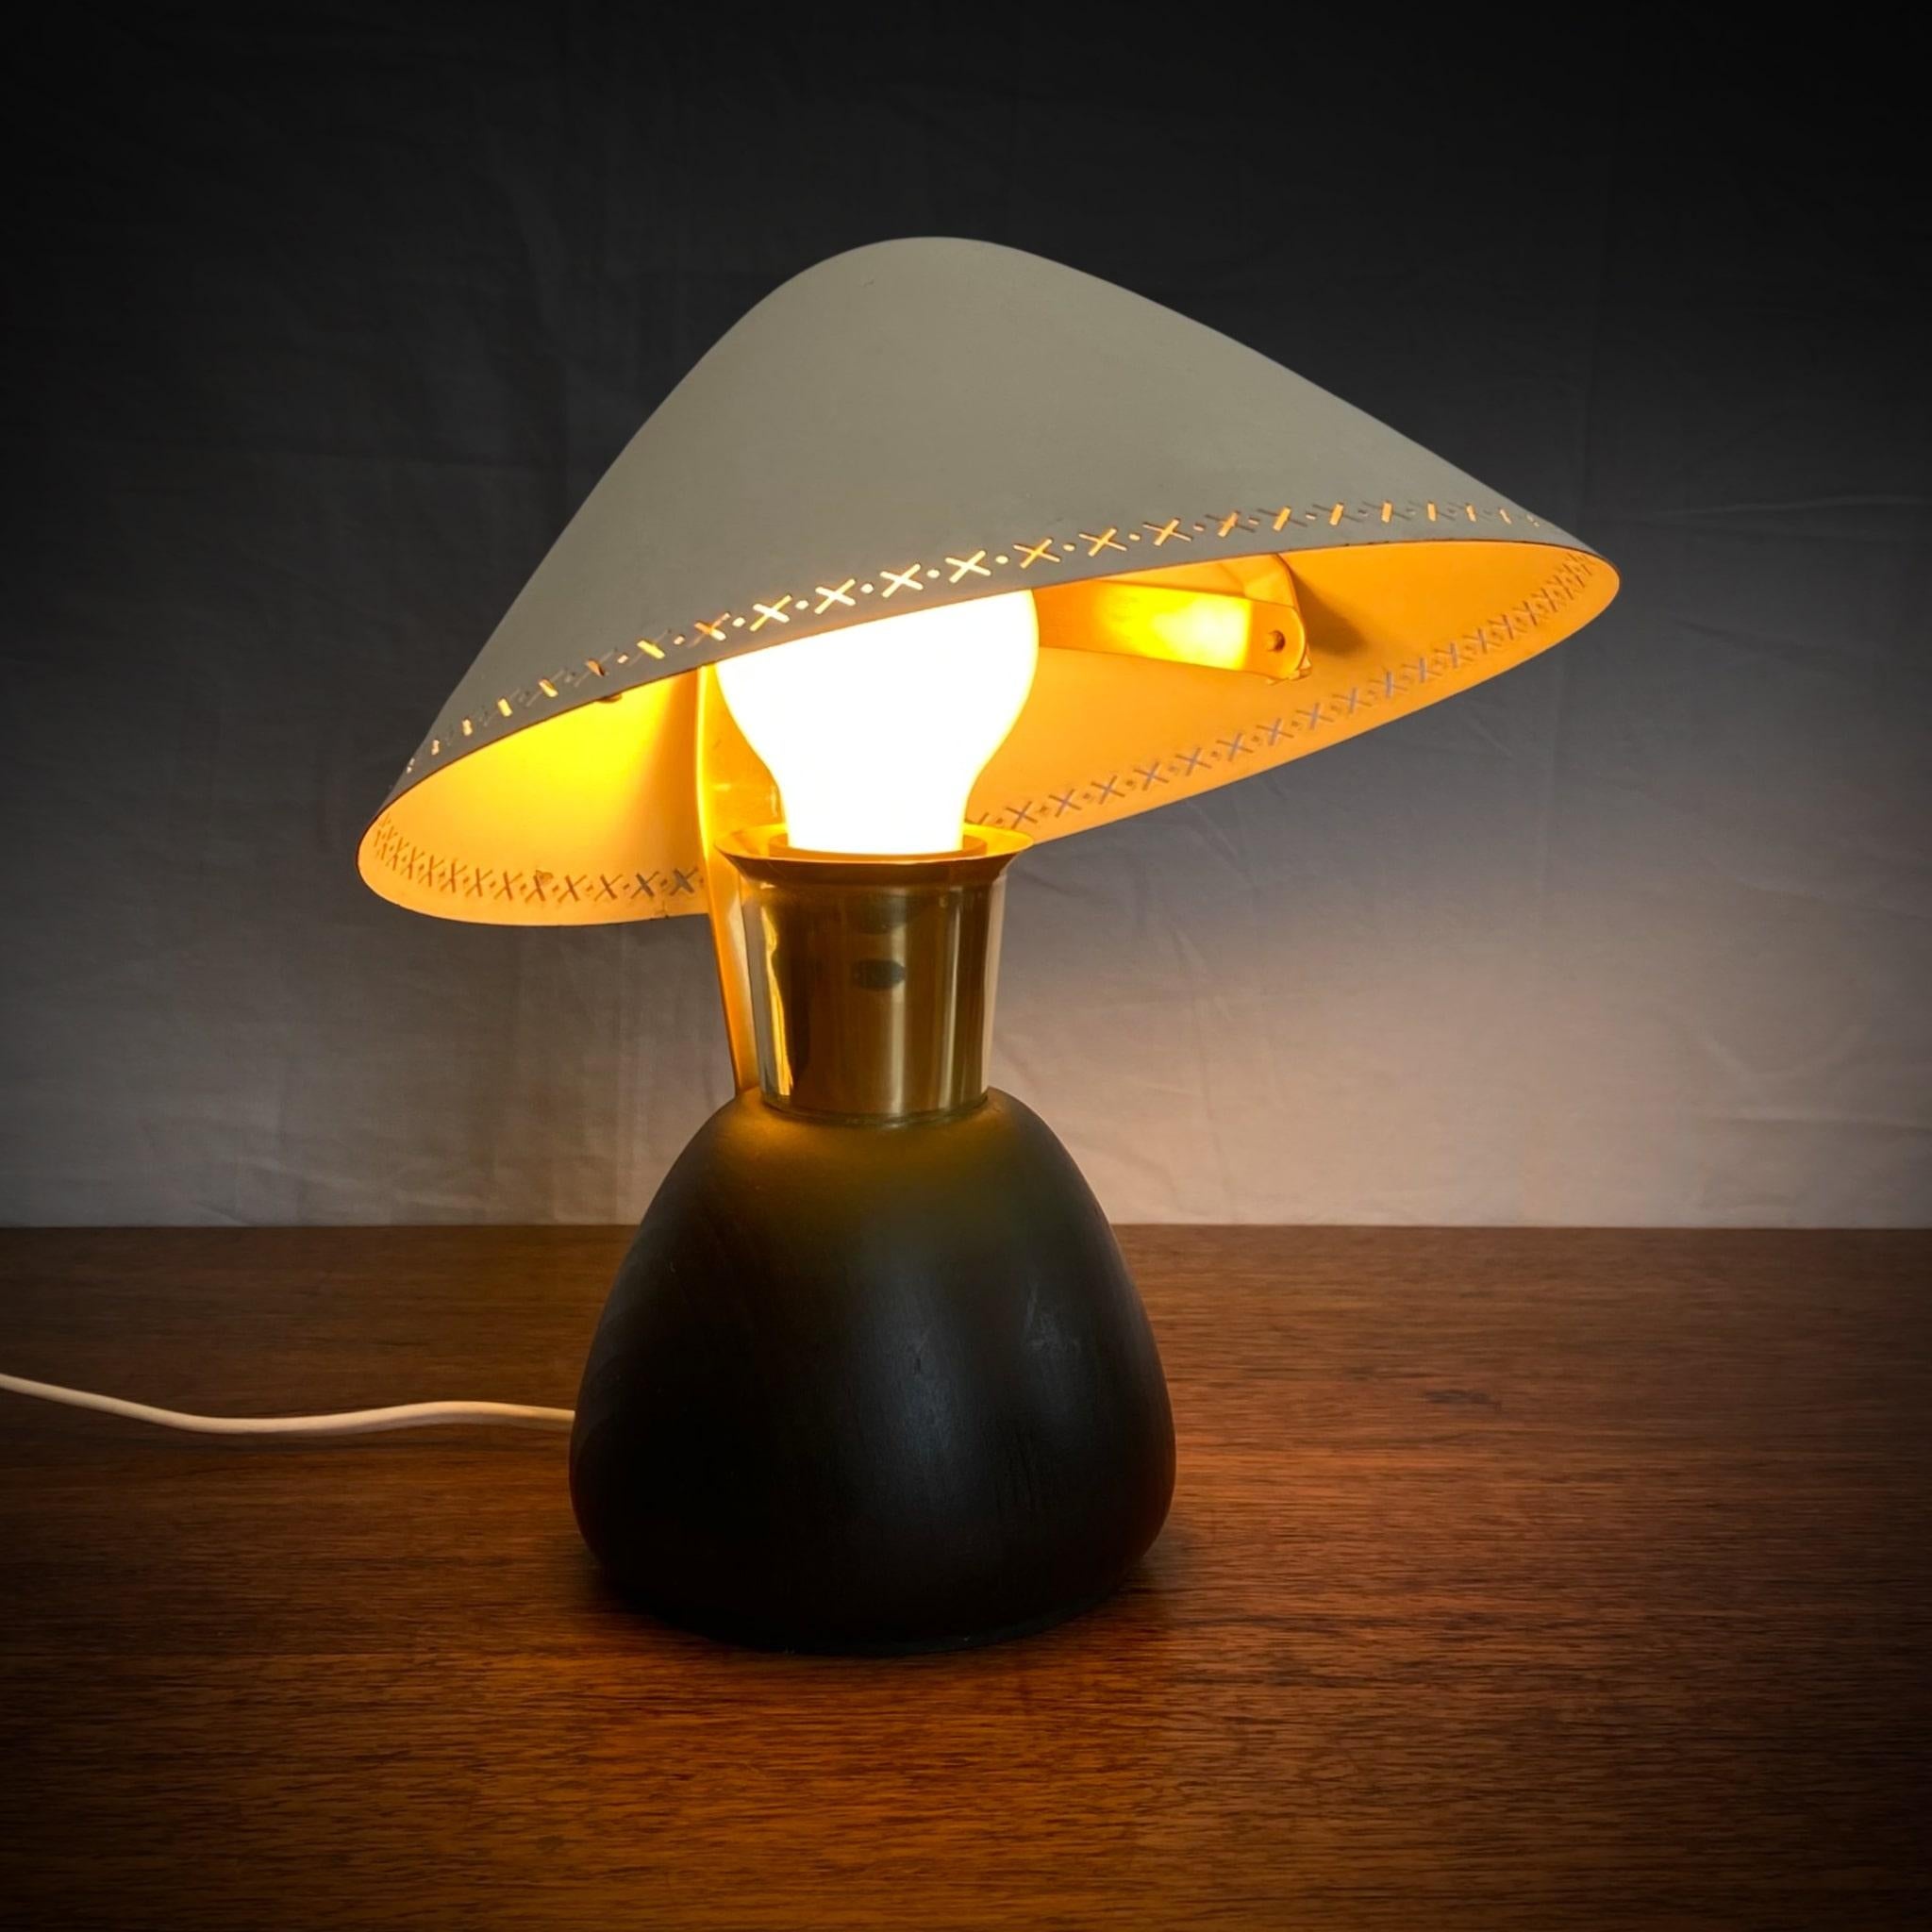 Rare ASEA table lamp, model E1272, dating back to the 1950s, featuring a rounded base crafted from solid wood. The disc shaped metal shade is adjustable and held in place by a brass arm.

ASEA, the Swedish electrical company, was established as